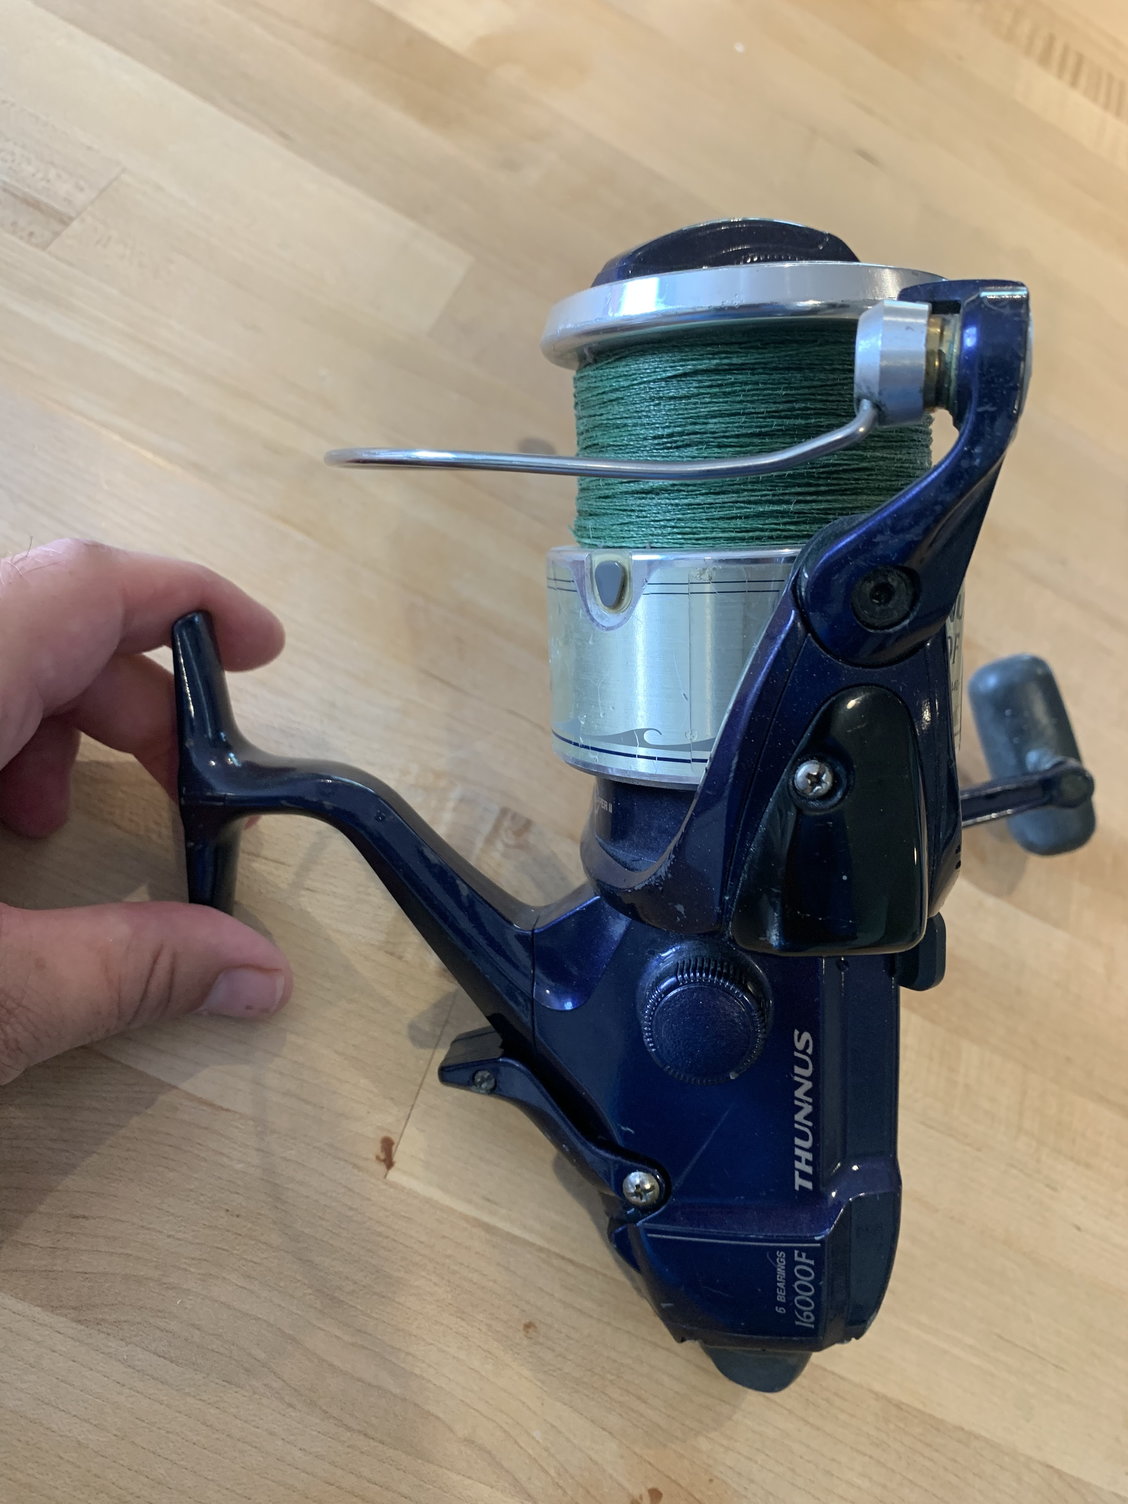 Shimano Baitrunner 4500B Reels-LIKE NEW - The Hull Truth - Boating and  Fishing Forum